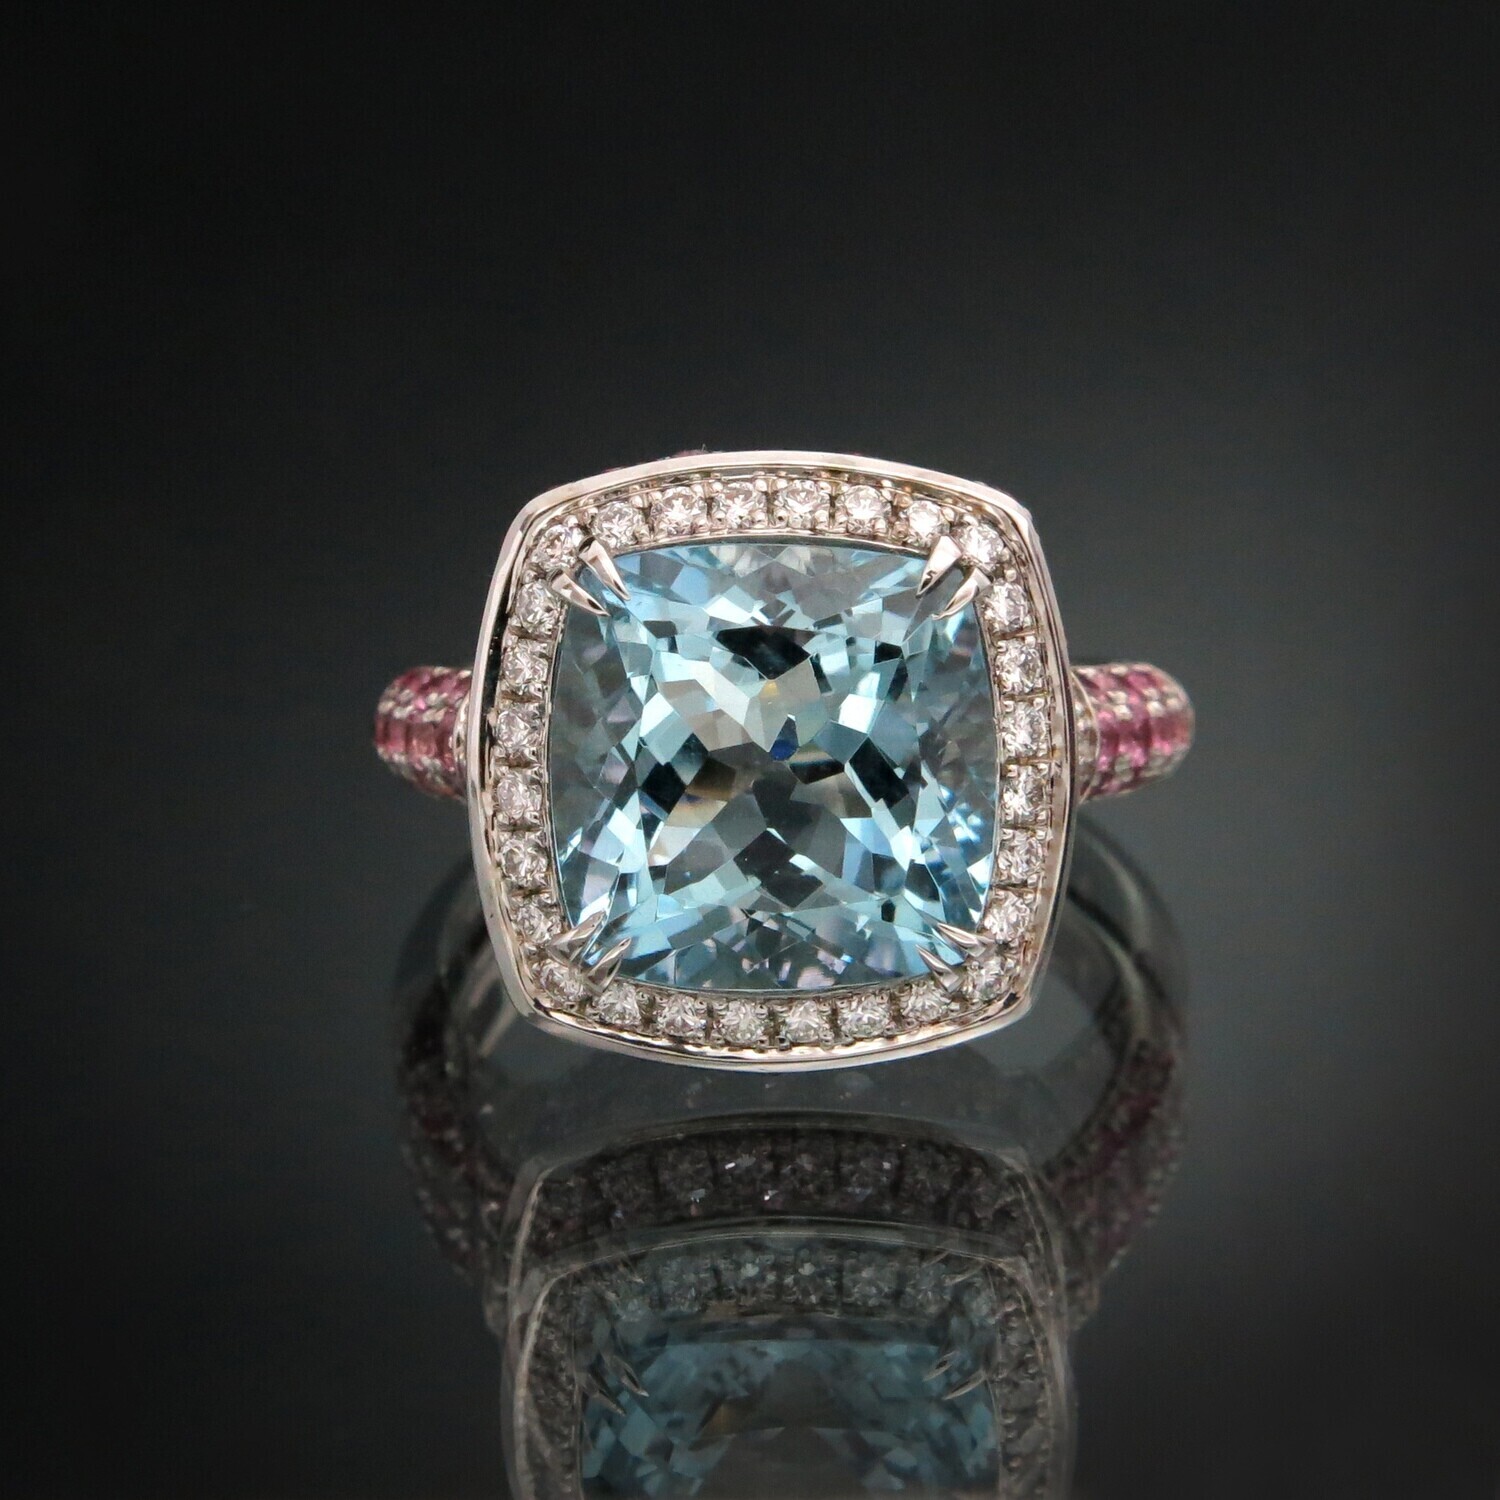 14K Gold Ring with Aquamarine, Diamonds and Sapphires, VH005